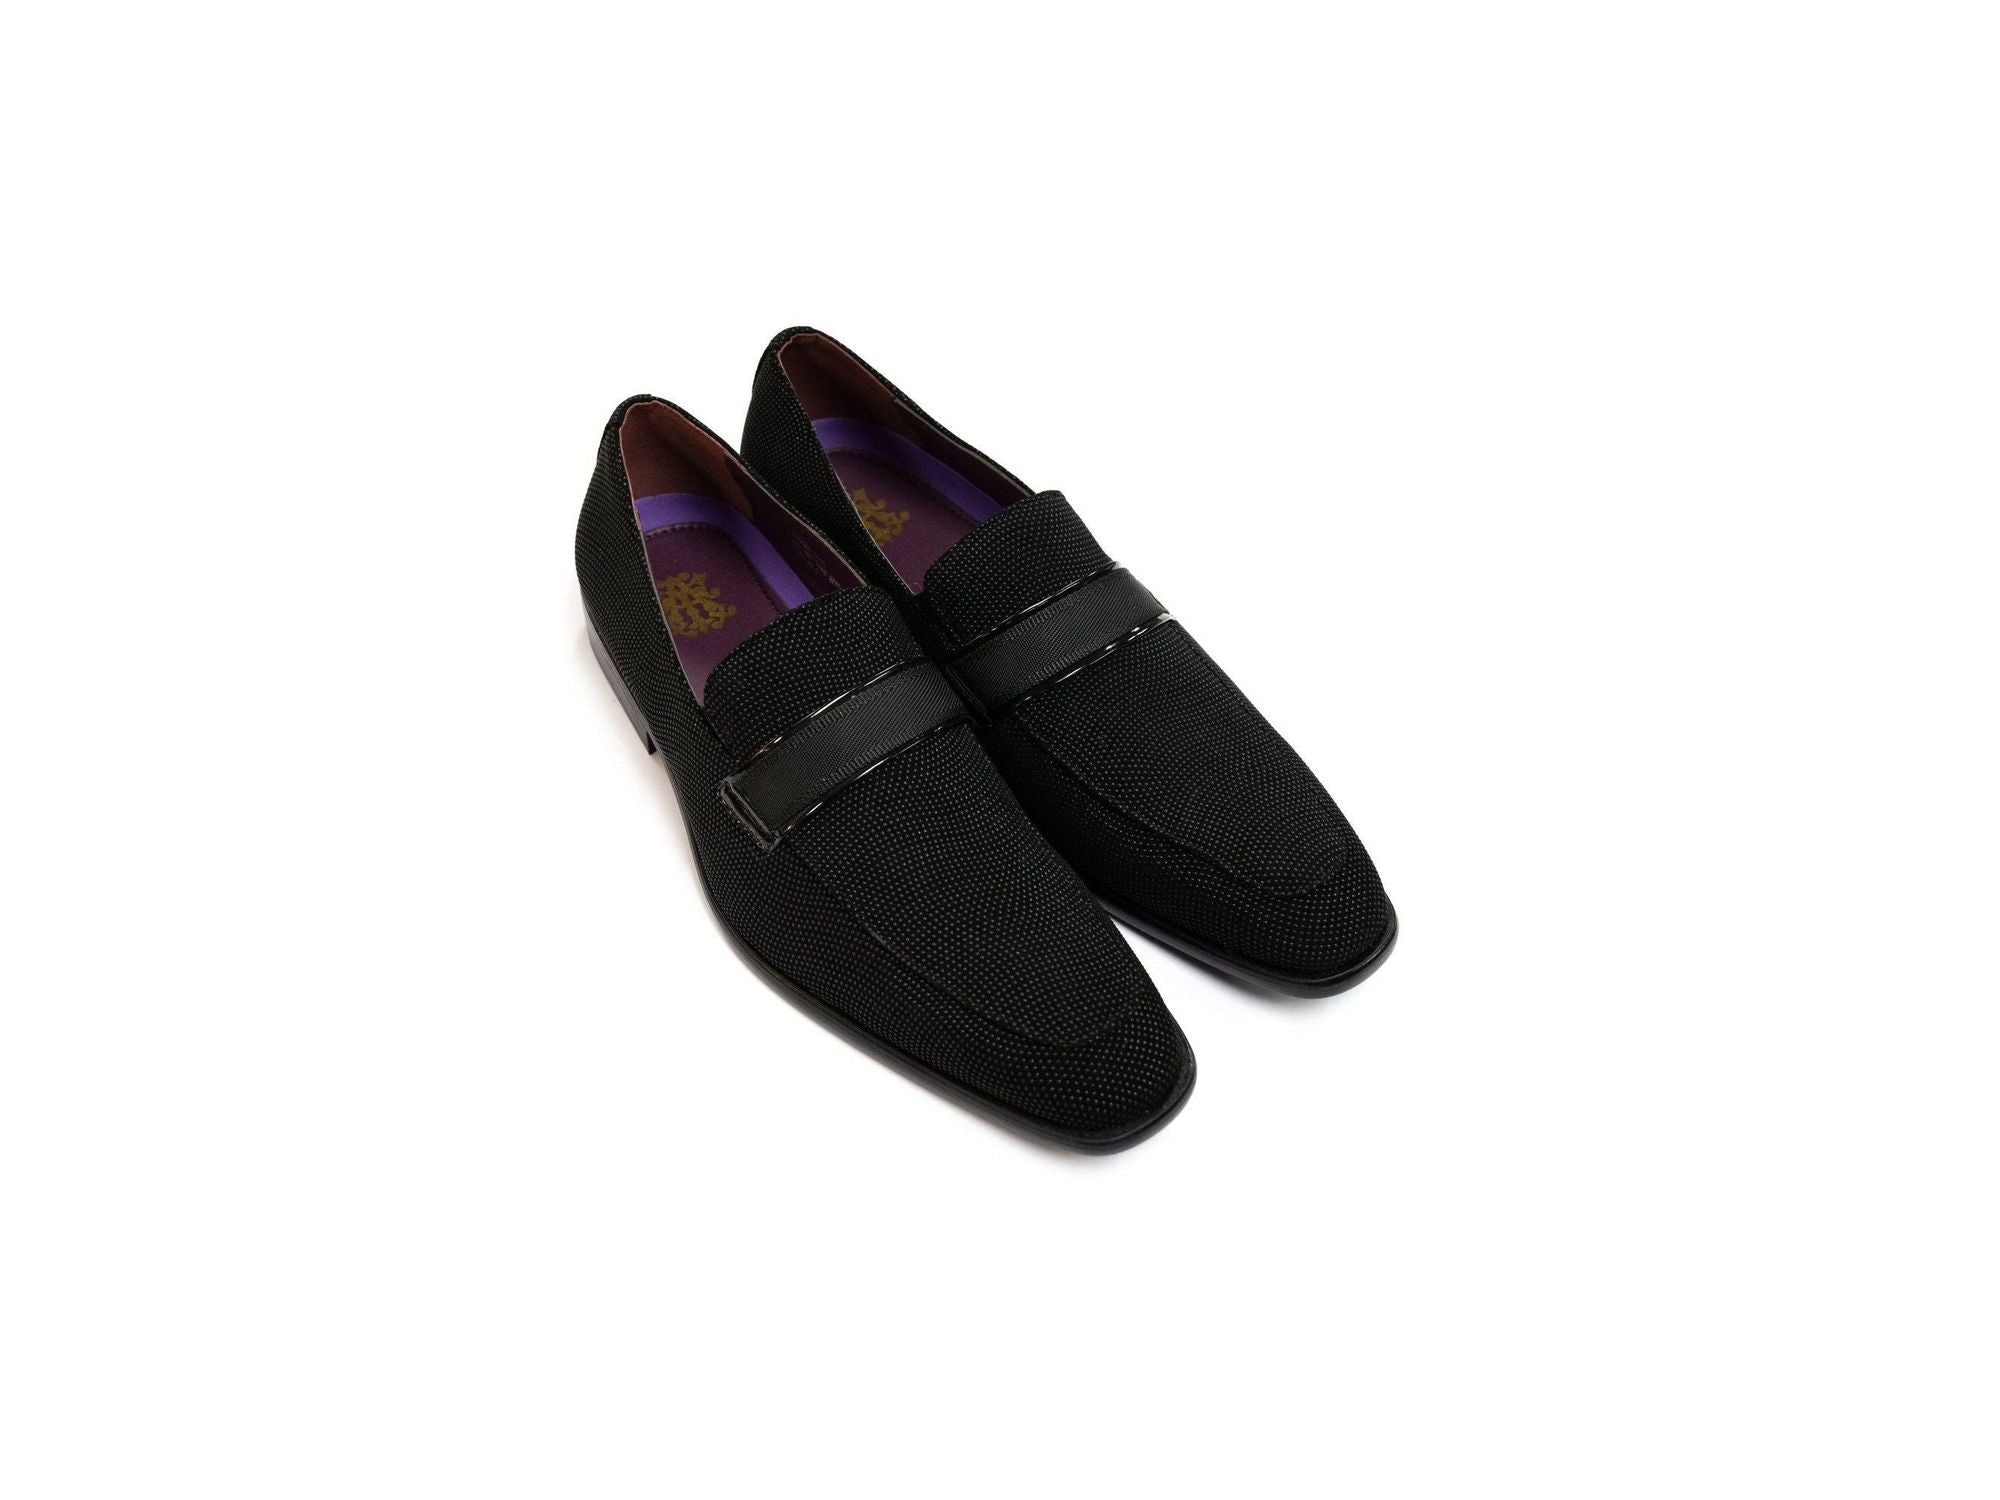 After Midnight Pindot Formal Loafer in Black - Rainwater's Men's Clothing and Tuxedo Rental